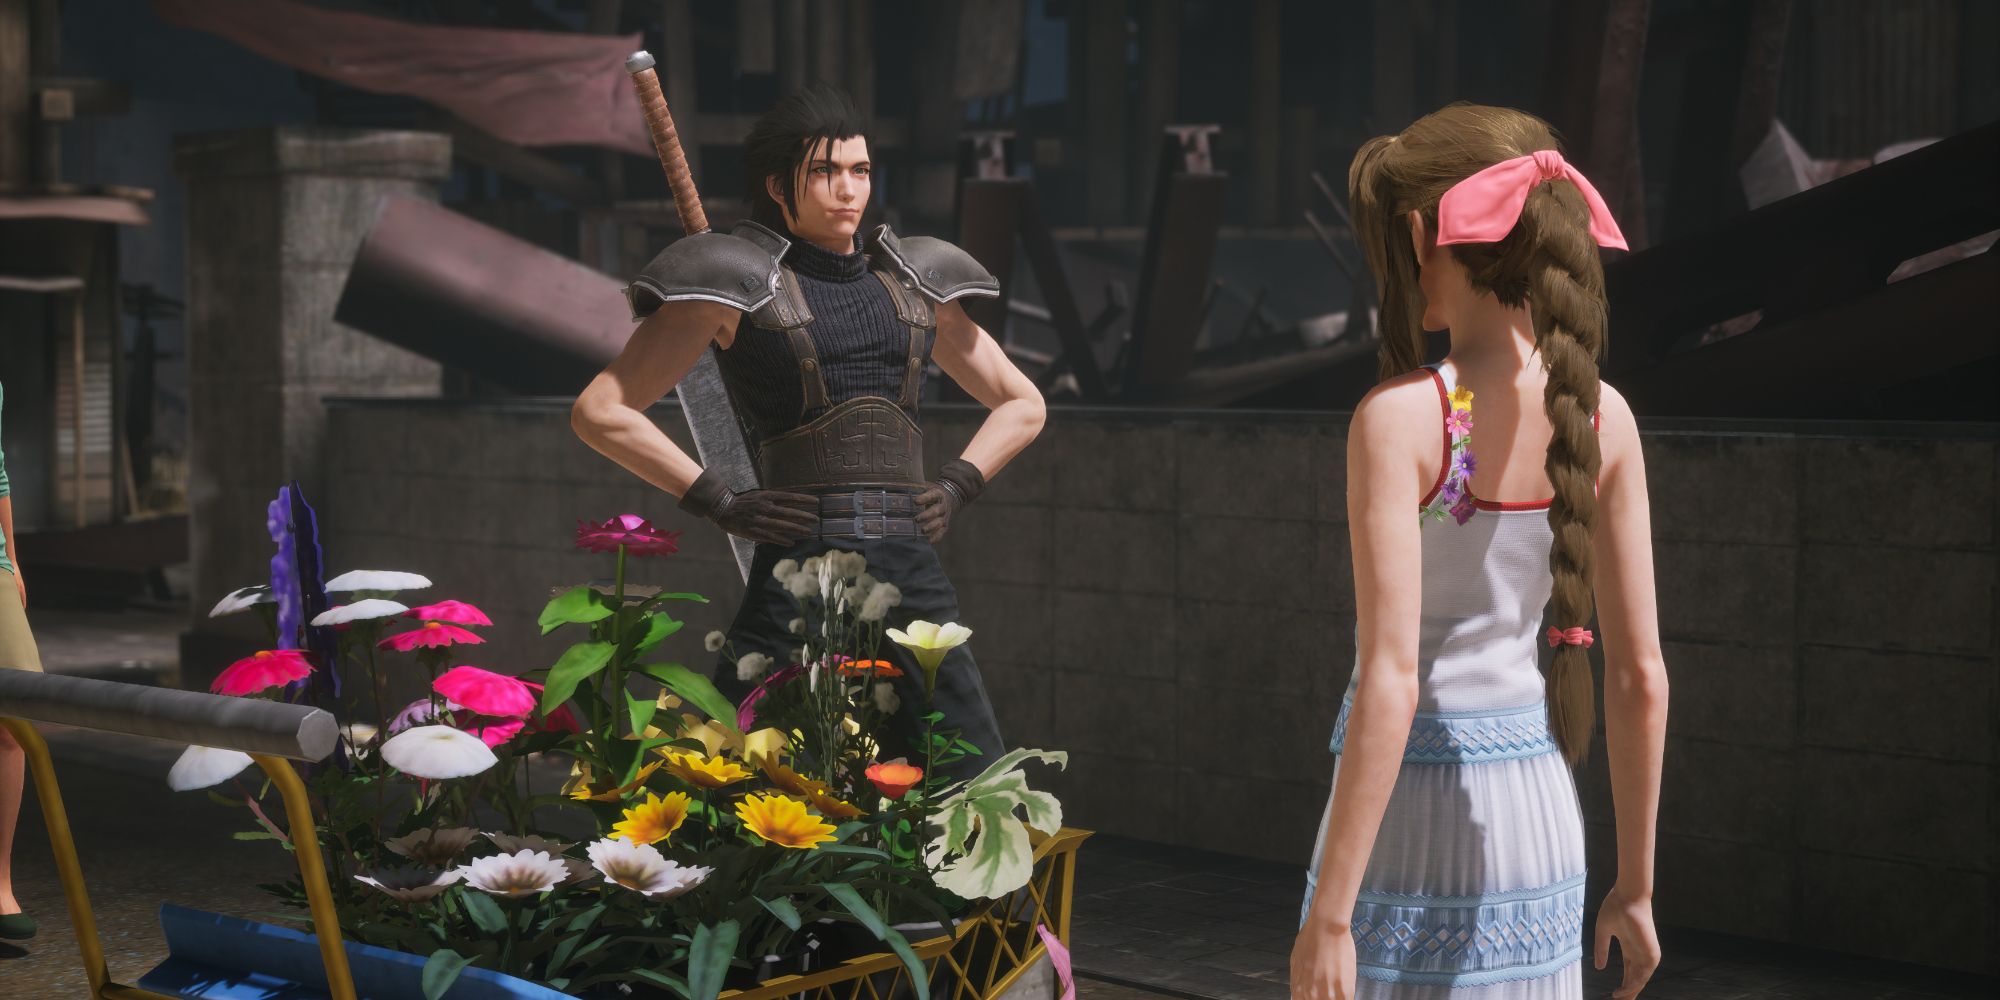 Zack and Aerith selling flowers in the Sector 5 Slums in Crisis Core: Final Fantasy 7 Reunion